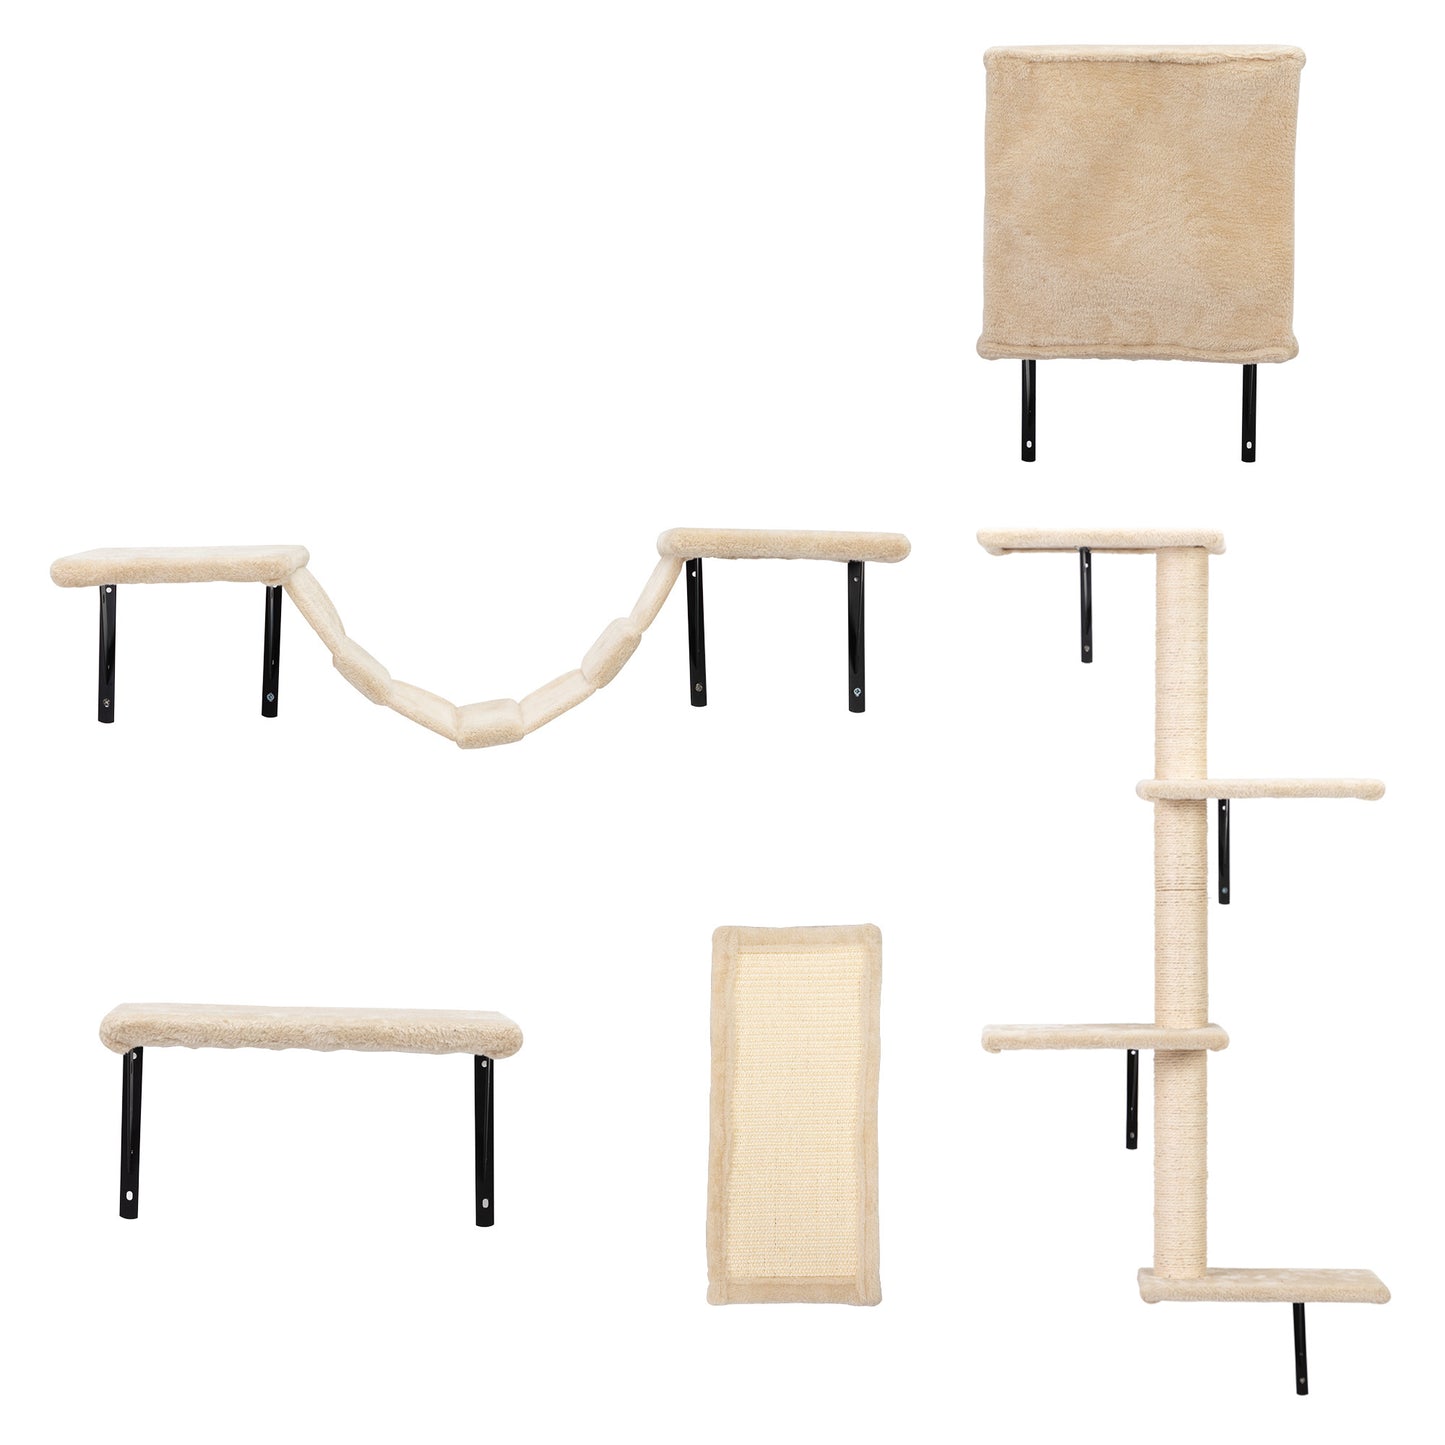 5 Pcs Wall Mounted Cat Climber Set;  Floating Cat Shelves and Perches;  Cat Activity Tree with Scratching Posts;  Modern Cat Furniture